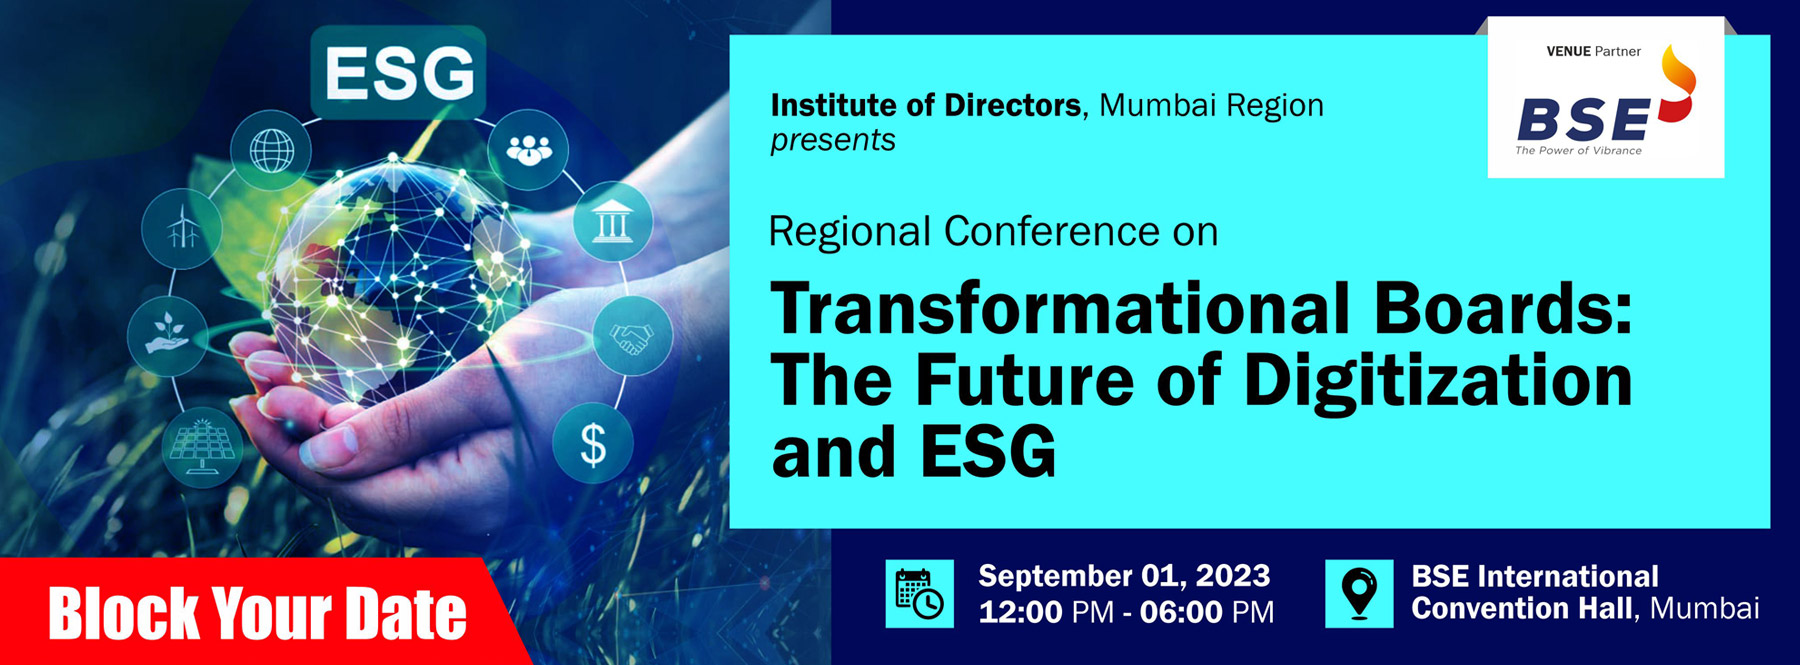 Regional Conference on Transformational Boards - The Future of Digitization and ESG